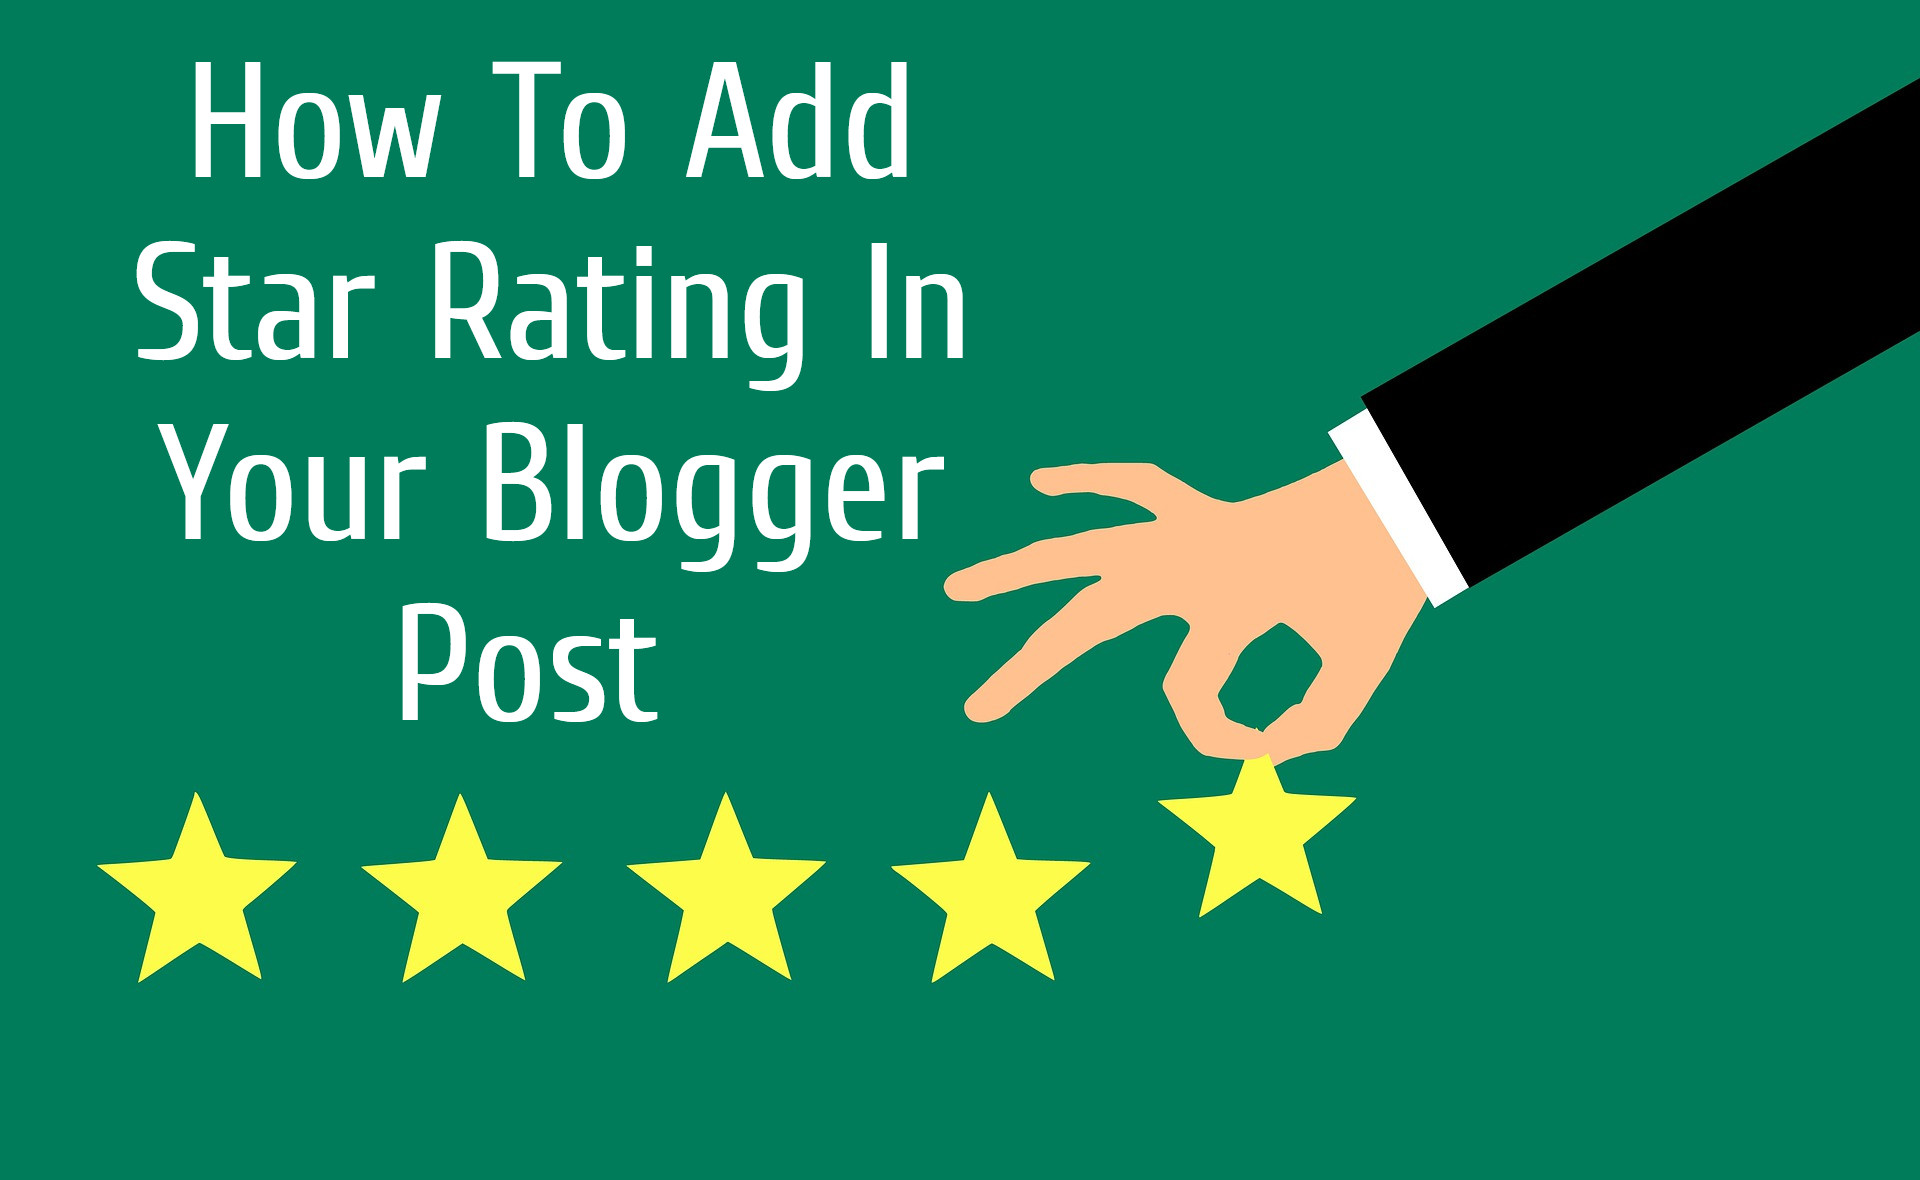 How To Add Star Rating Snippets In Blogger Post 2021